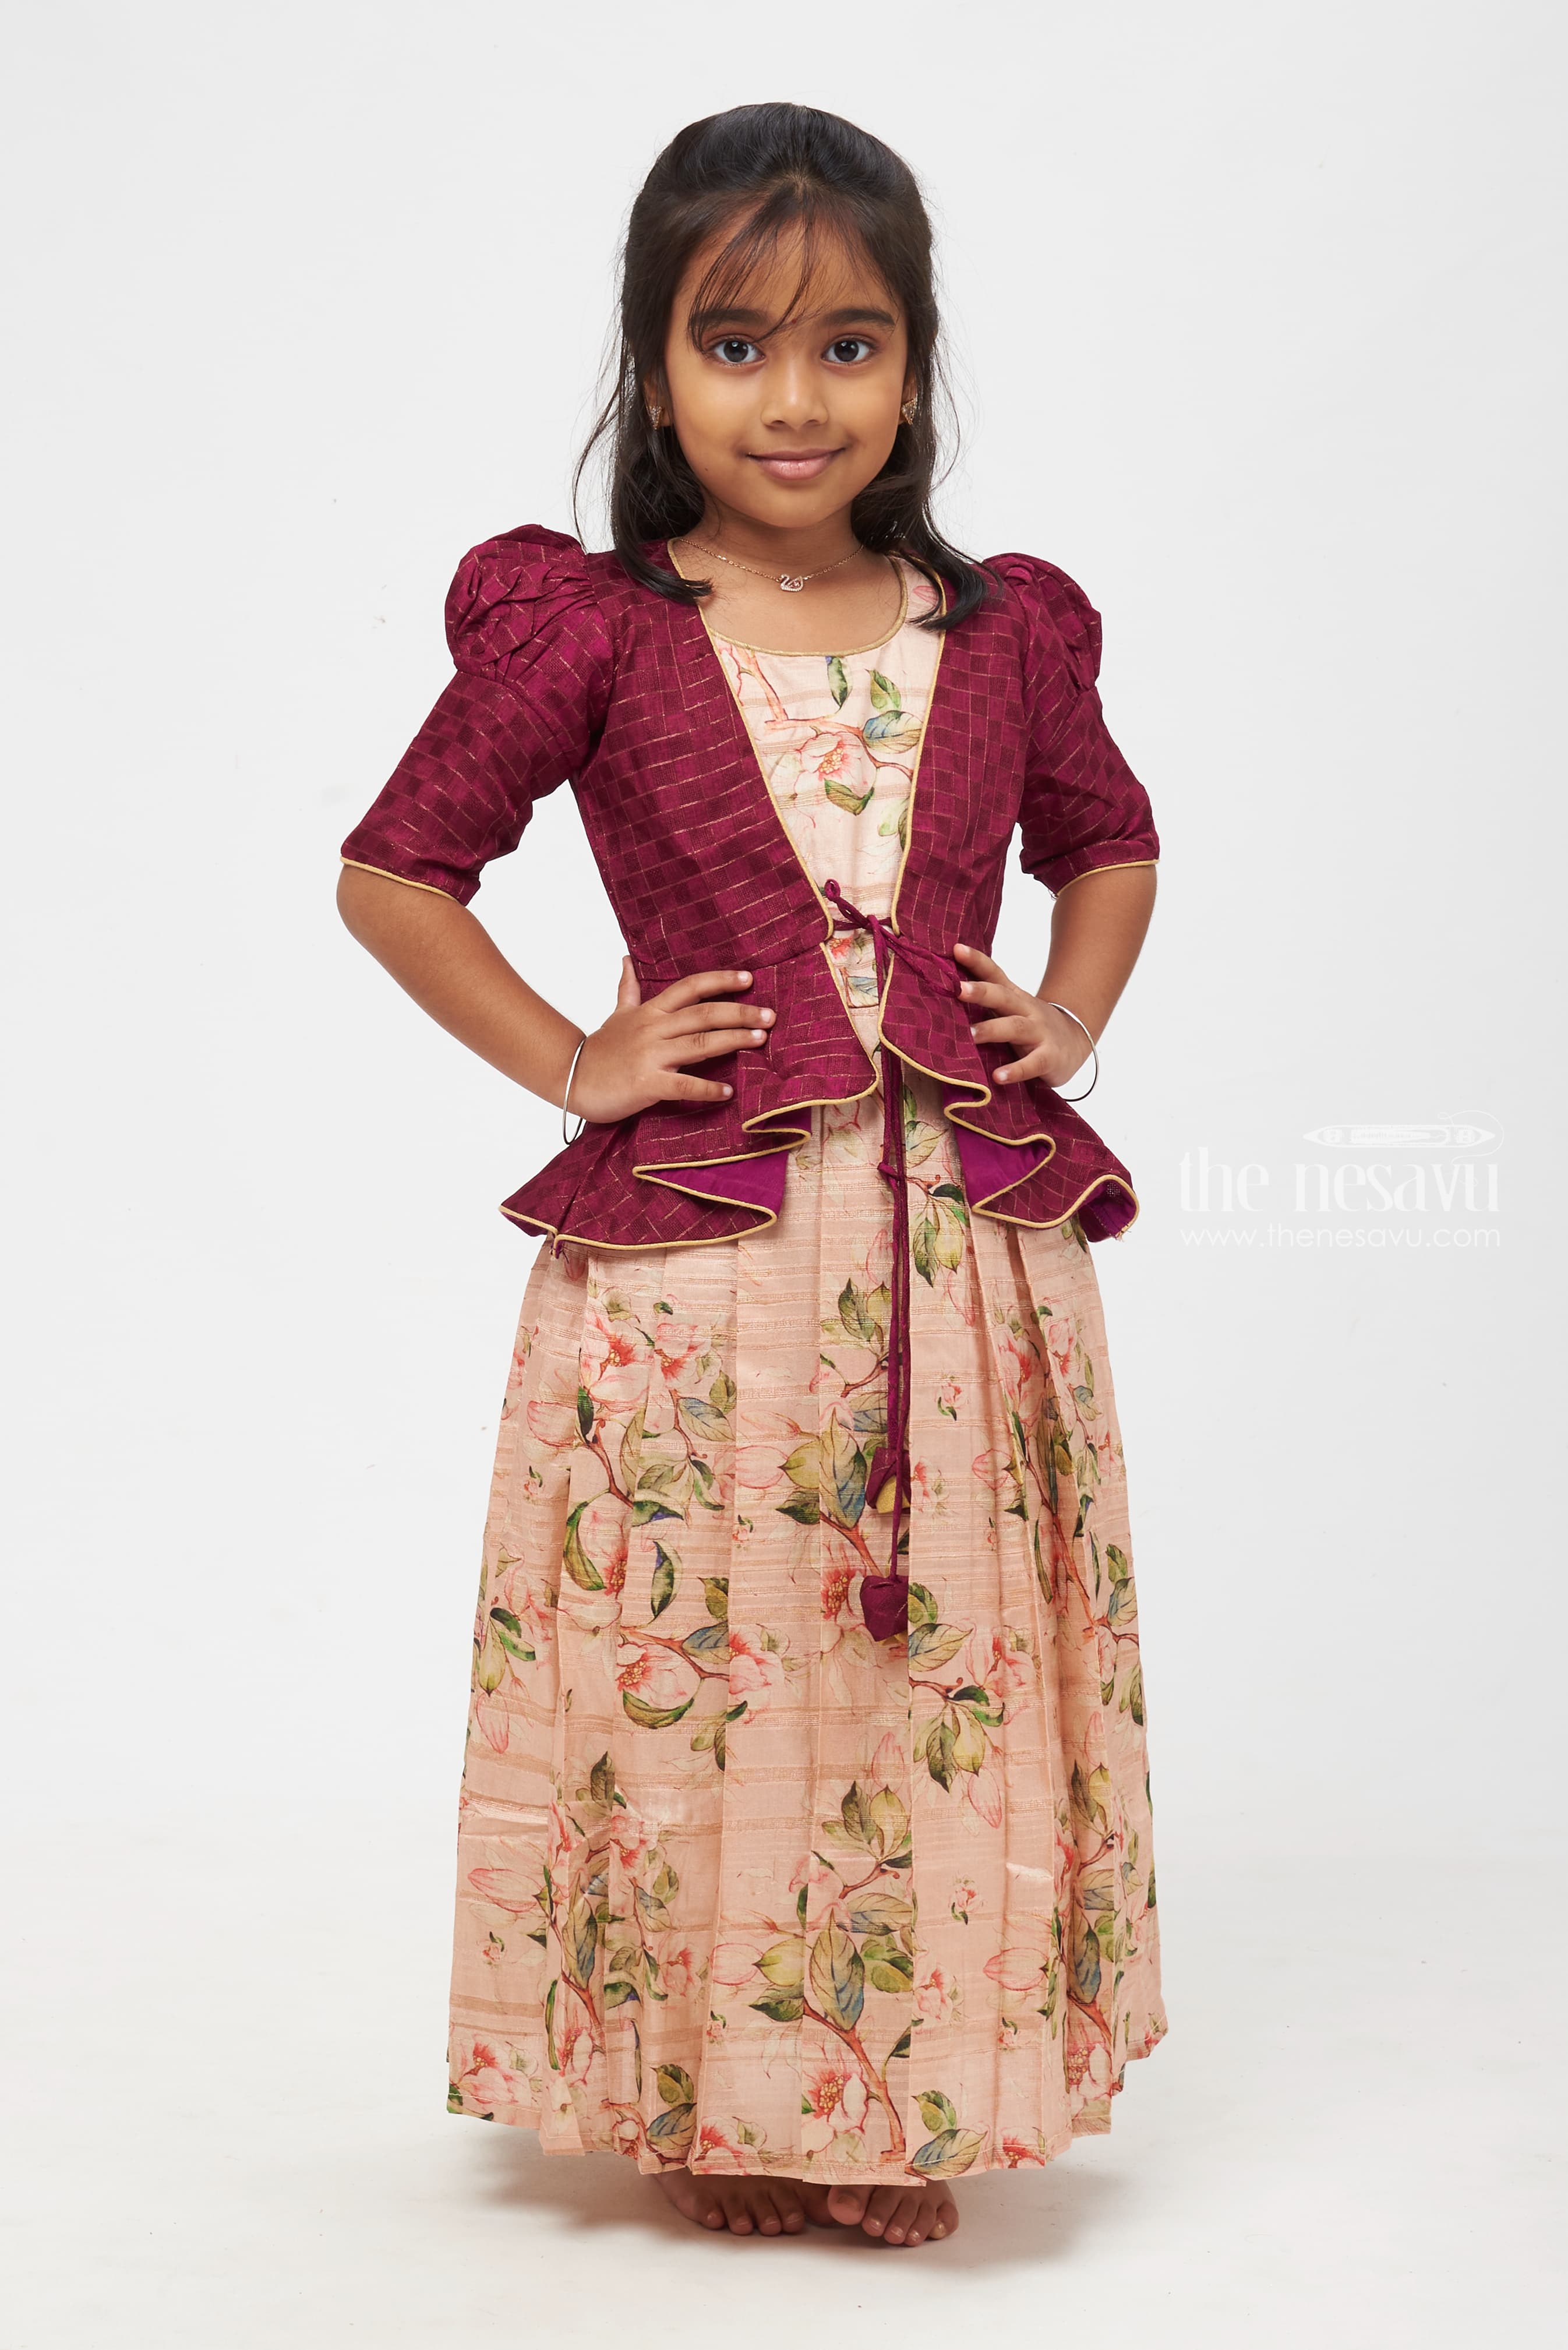 COMISARA 3-9 Years Flower Girls Dresses Floral Pageant Party India | Ubuy